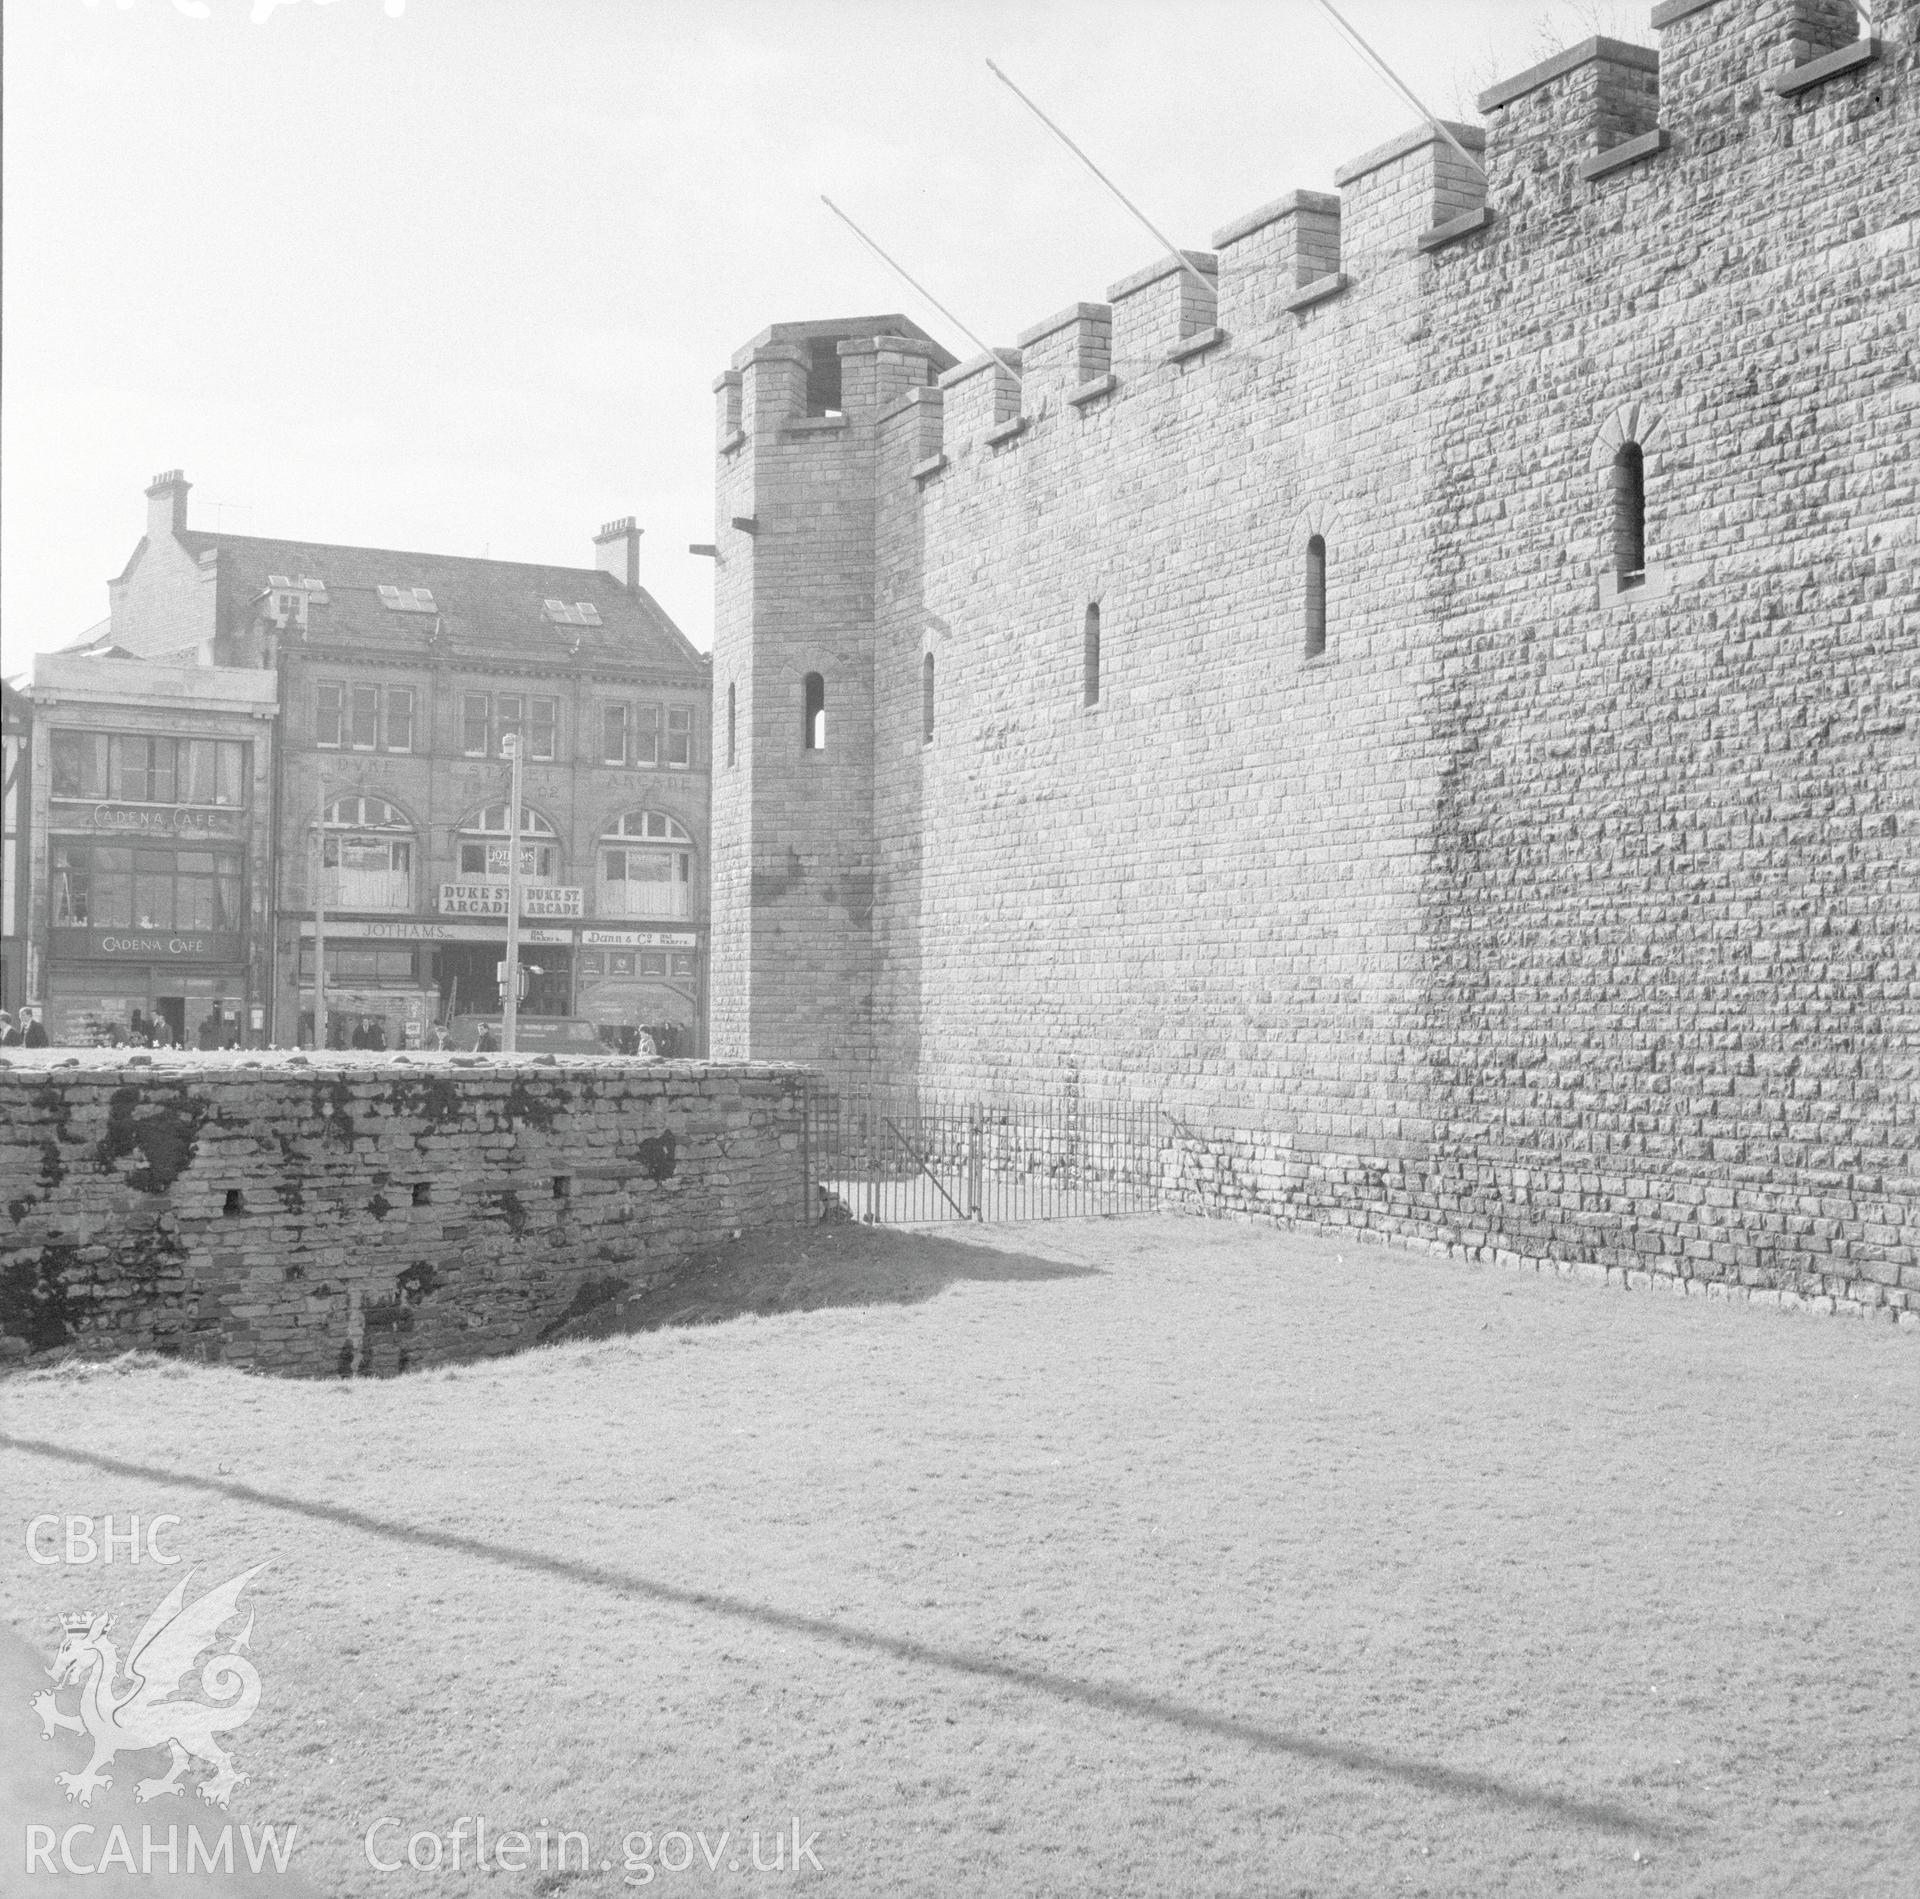 Digital copy of a black and white negative showing west wall of Cardiff Castle, taken 21st February 1966.